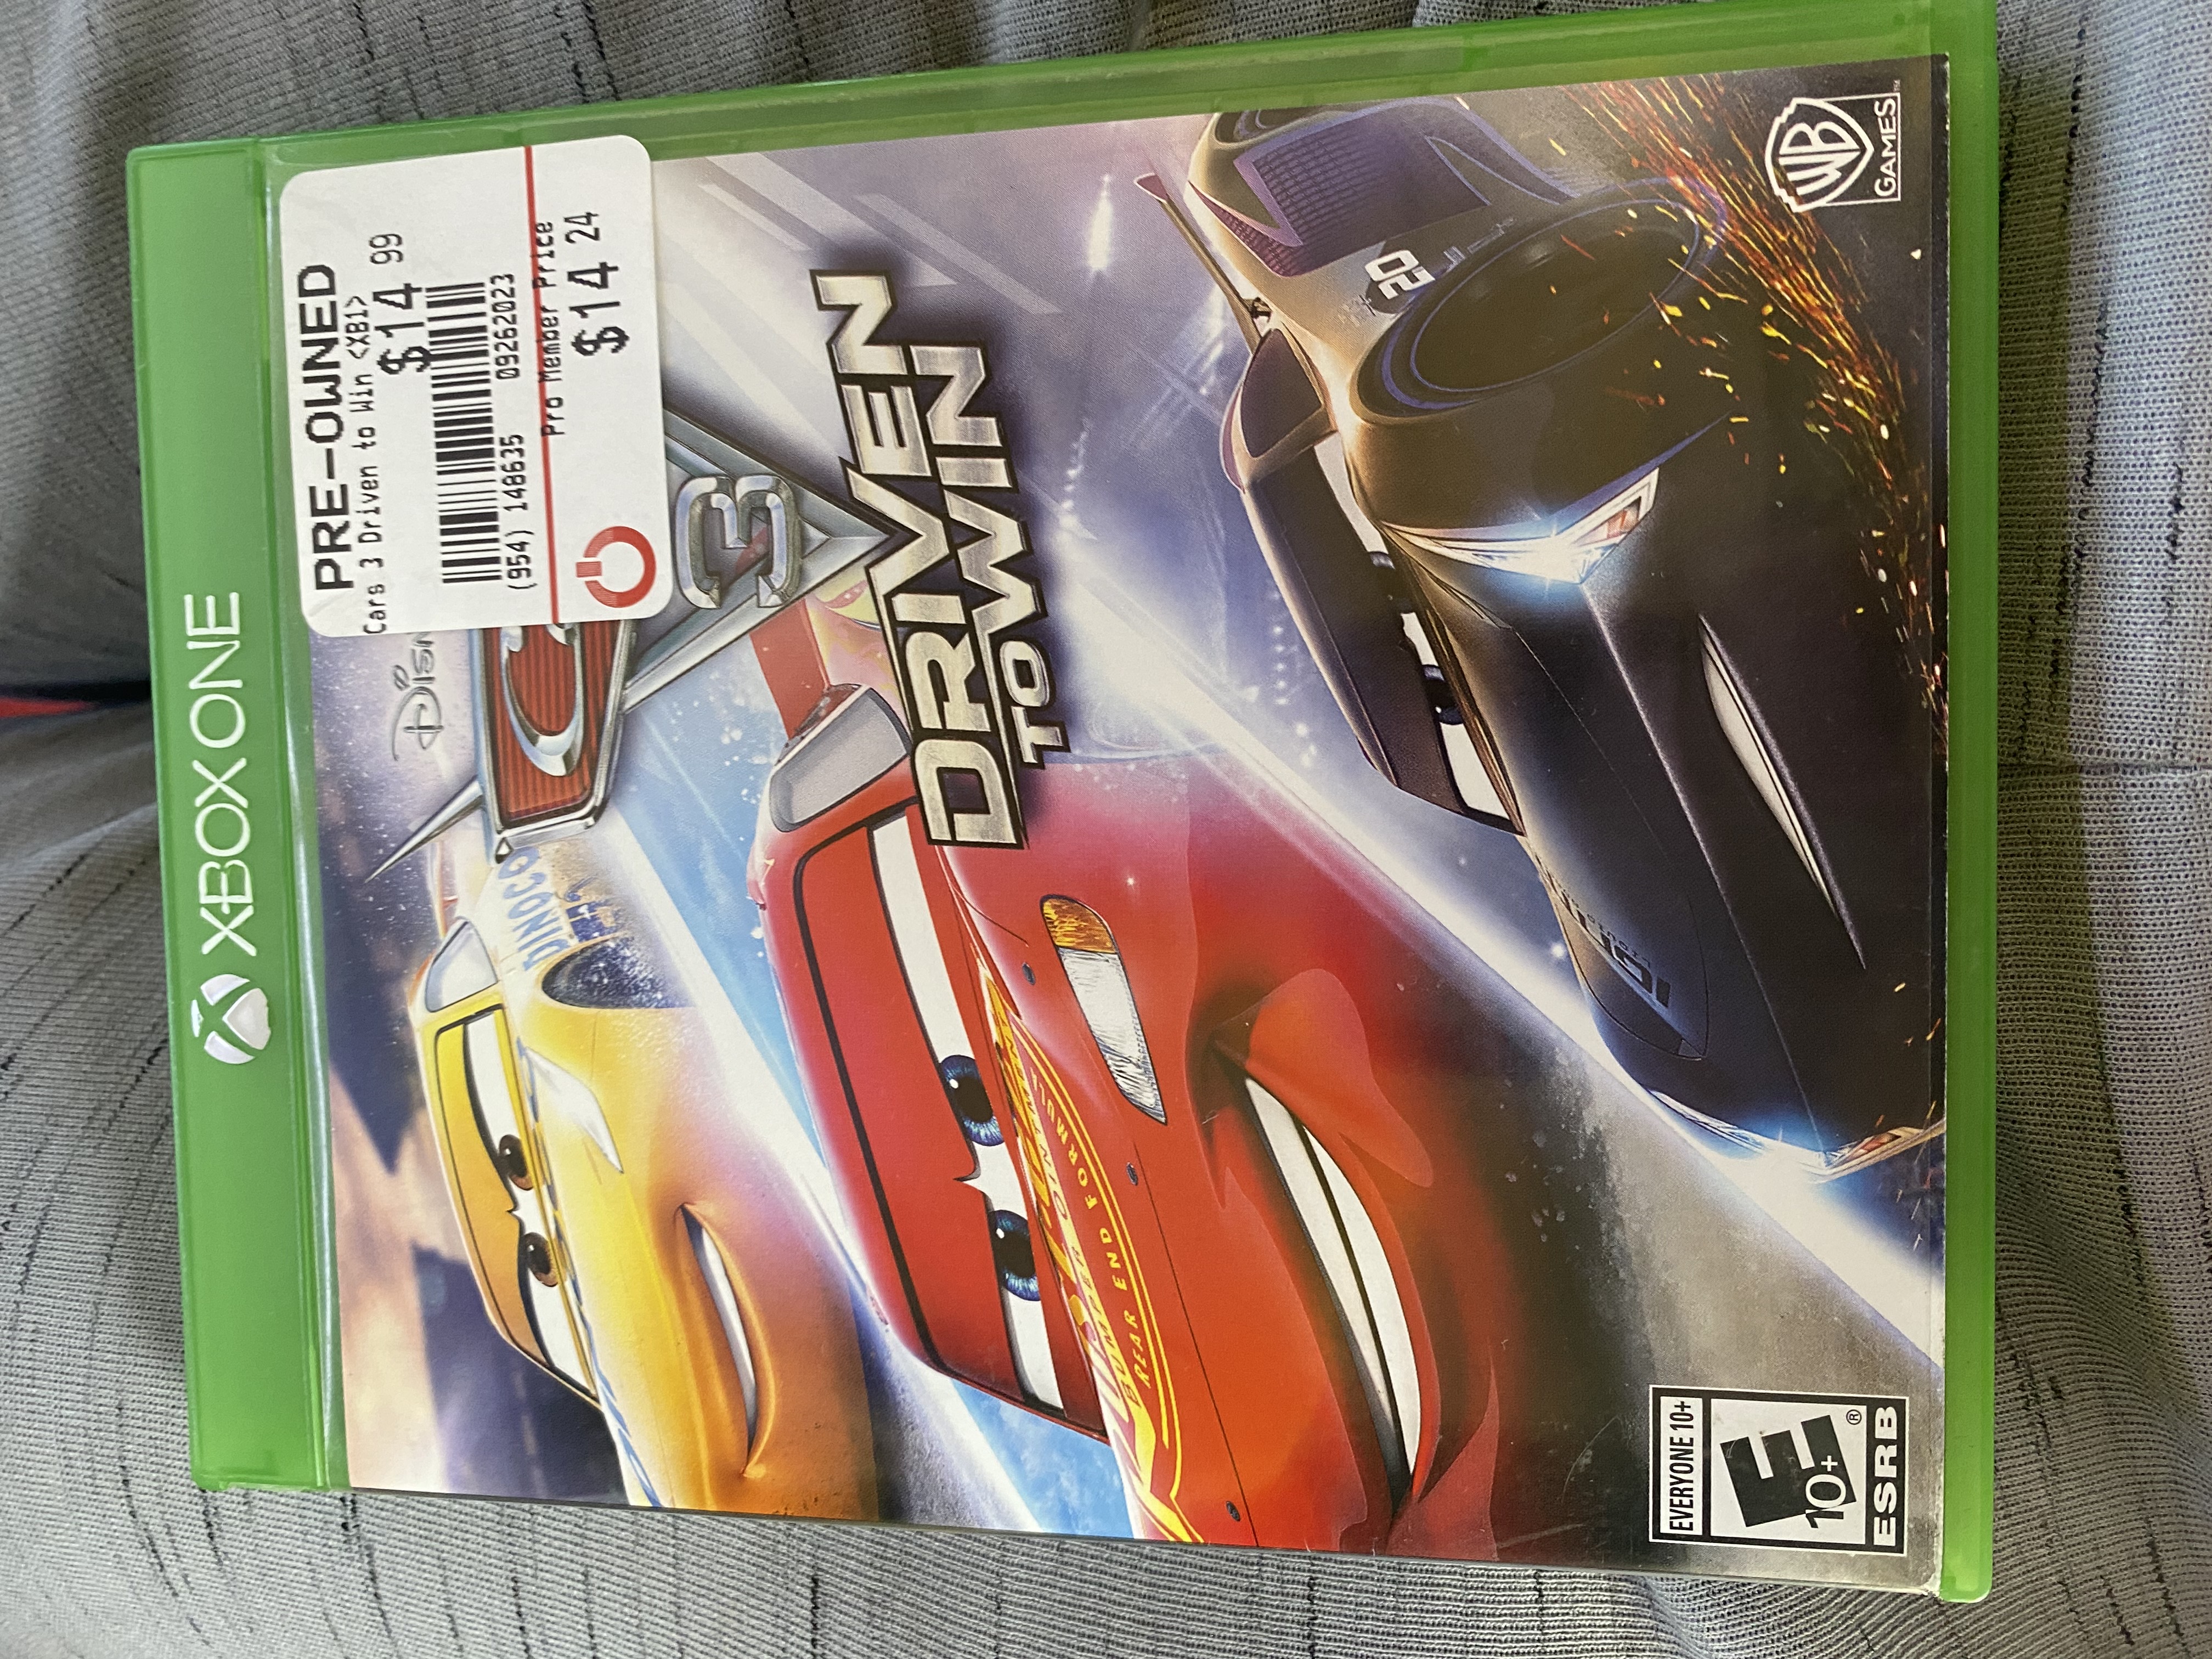 I got Cars 3 Driven To Win on Xbox one by Noahtrainz2005 on DeviantArt